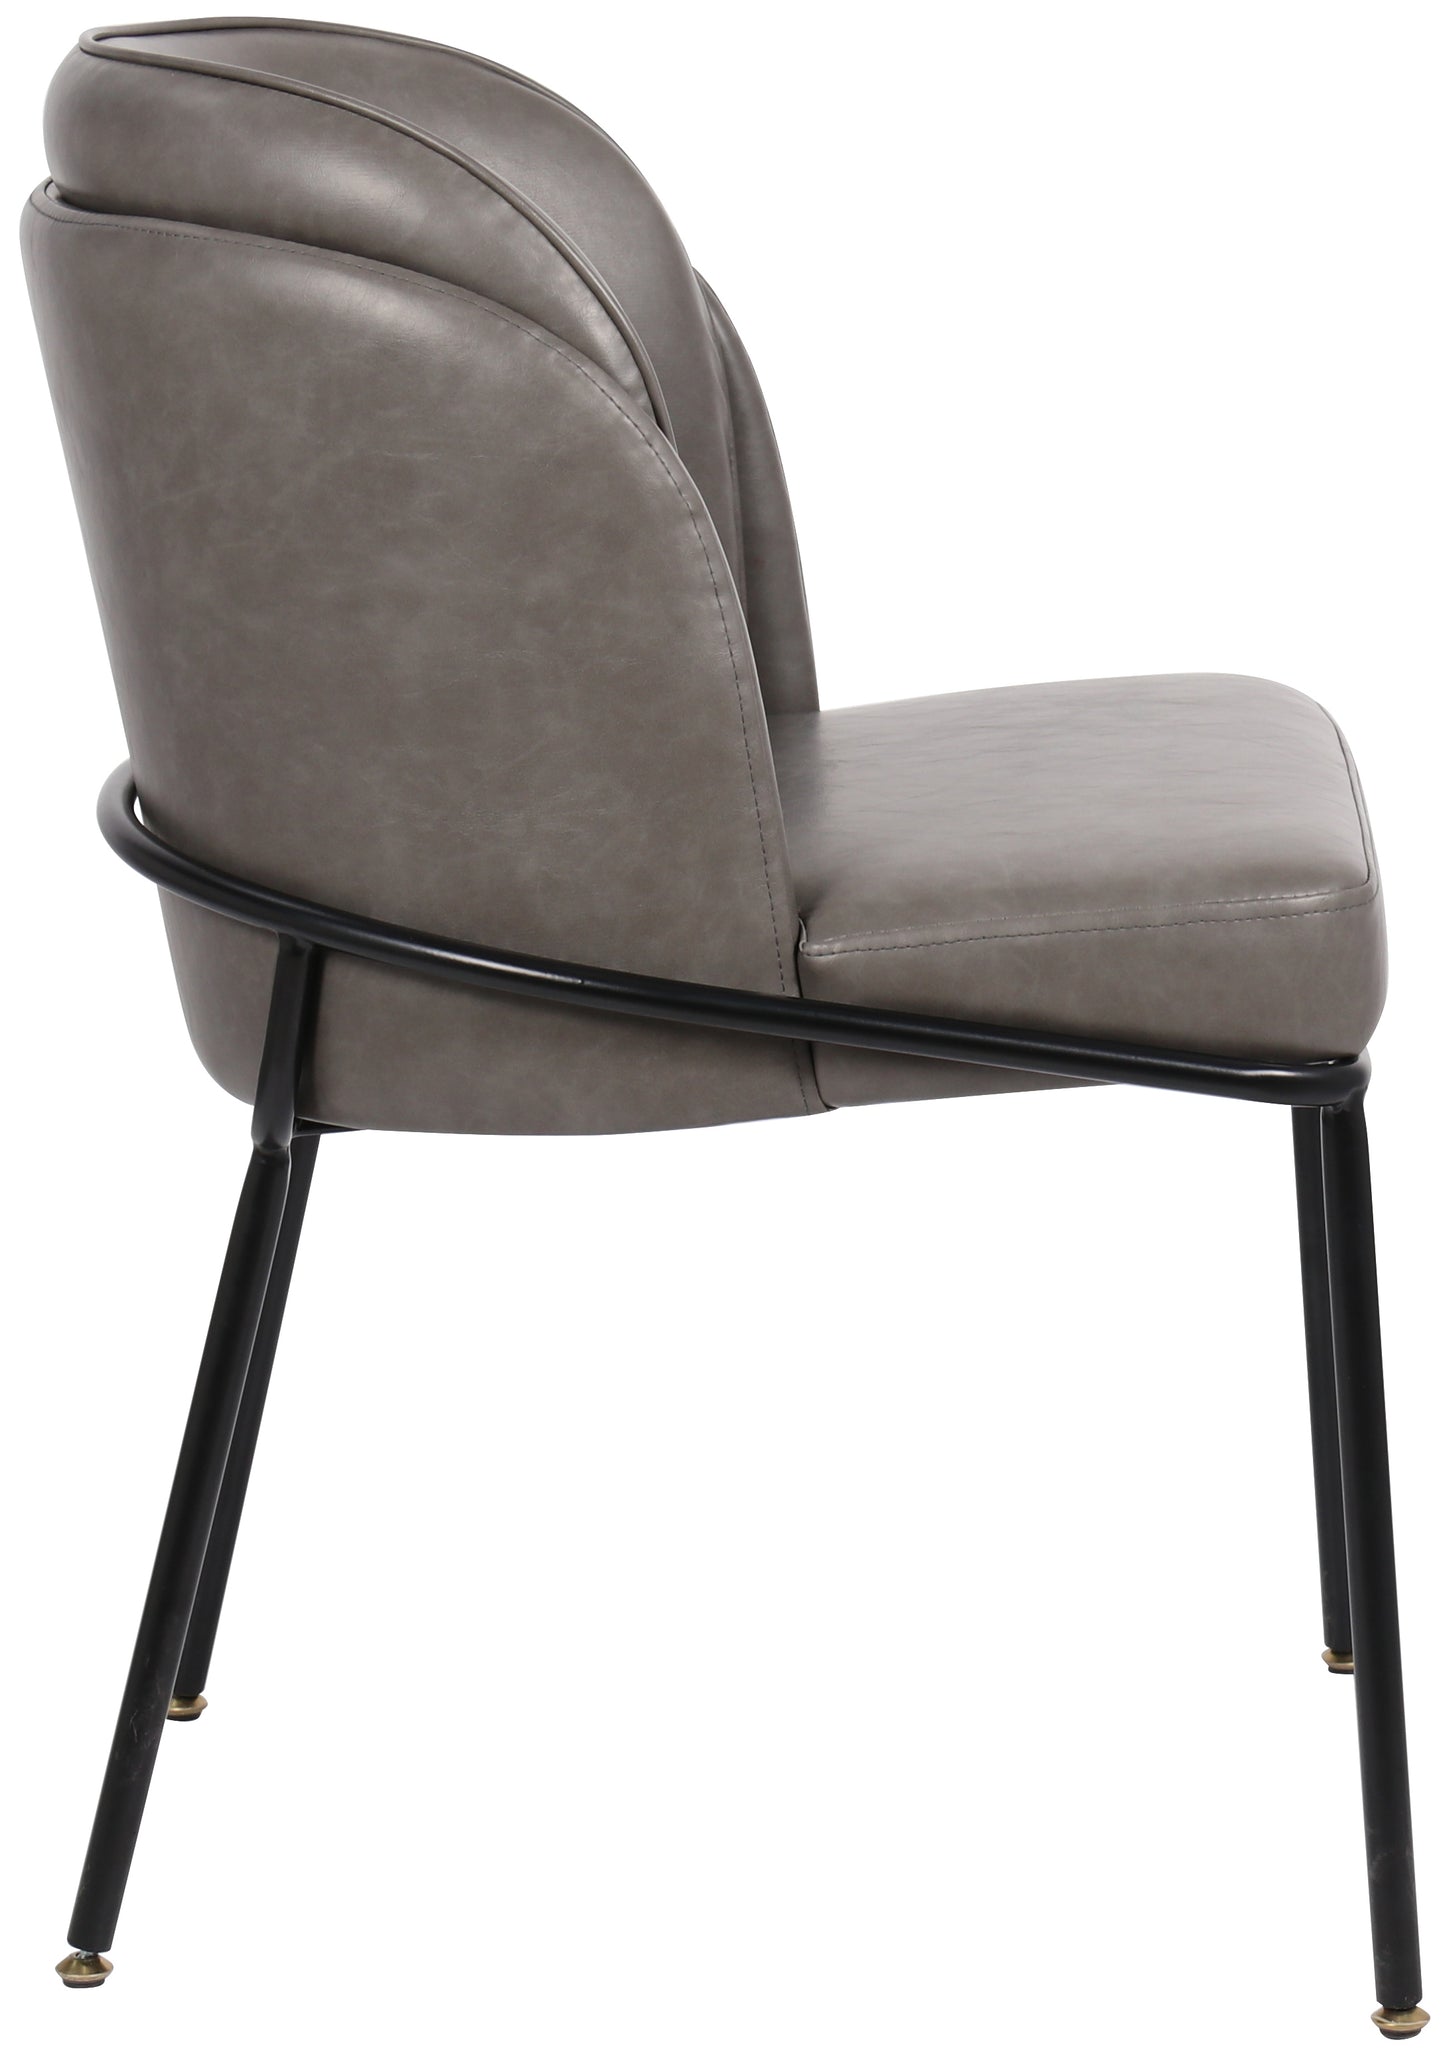 reflection grey faux leather dining chair c